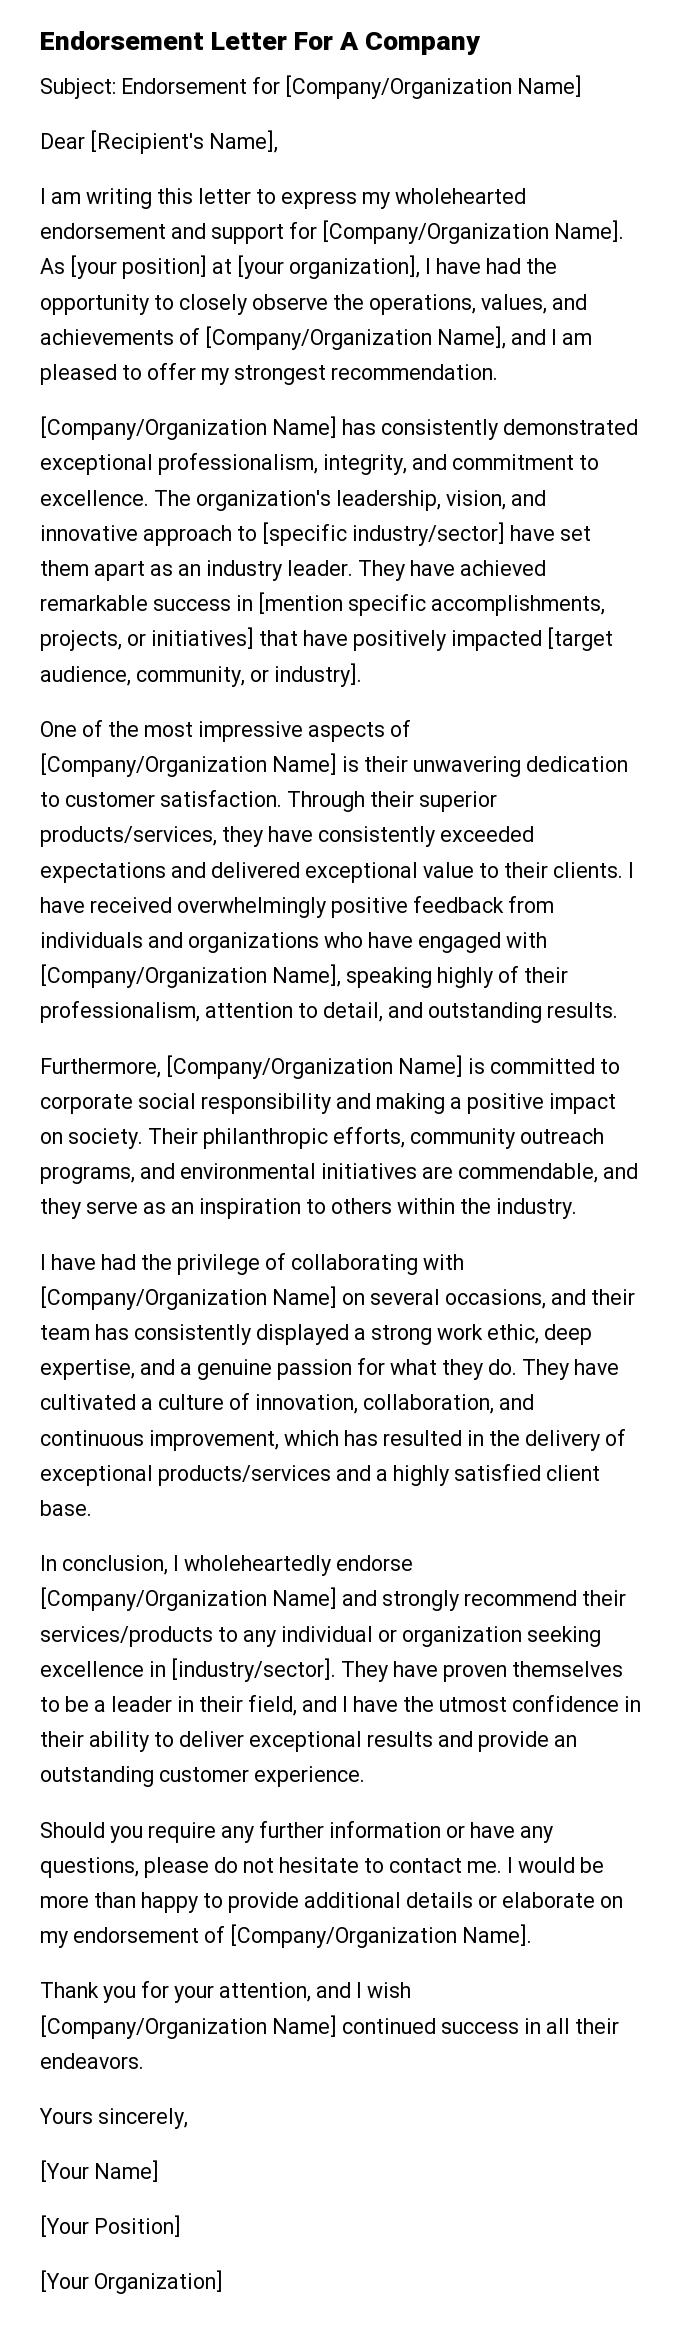 Endorsement Letter For A Company